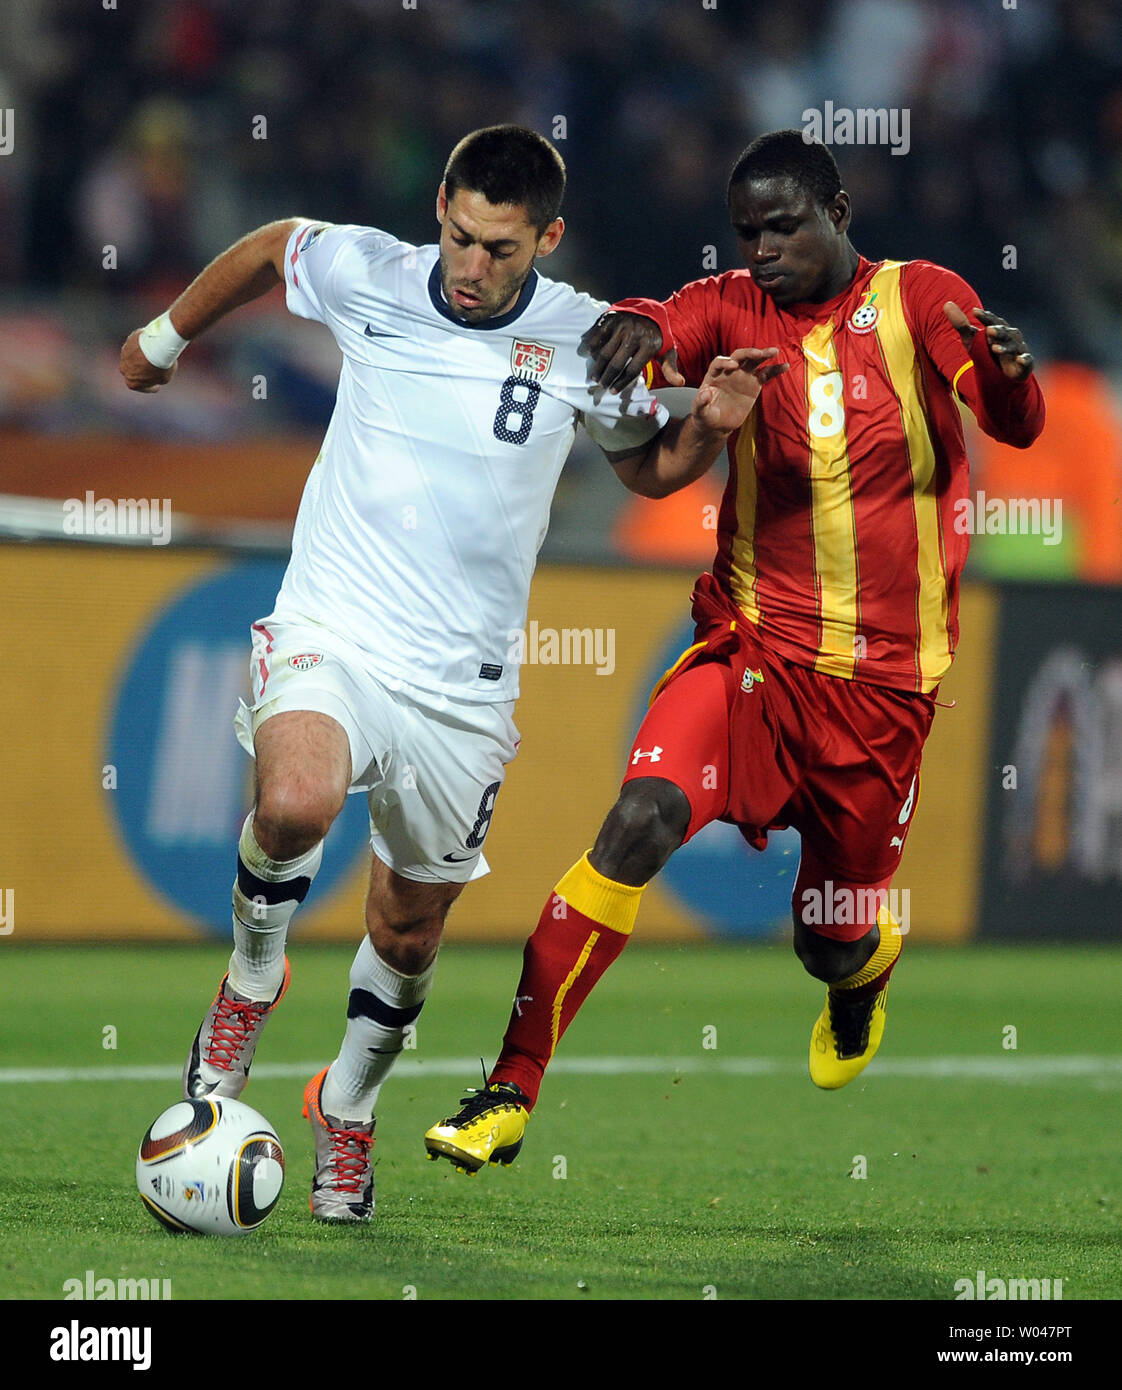 Clint Dempsey of USA and Jonathan Mensah of Ghana chase the ball during the Round of 16 match at the Royal Bafokeng Stadium in Rustenburg, South Africa on June 26, 2010. UPI/Chris Brunskill Stock Photo